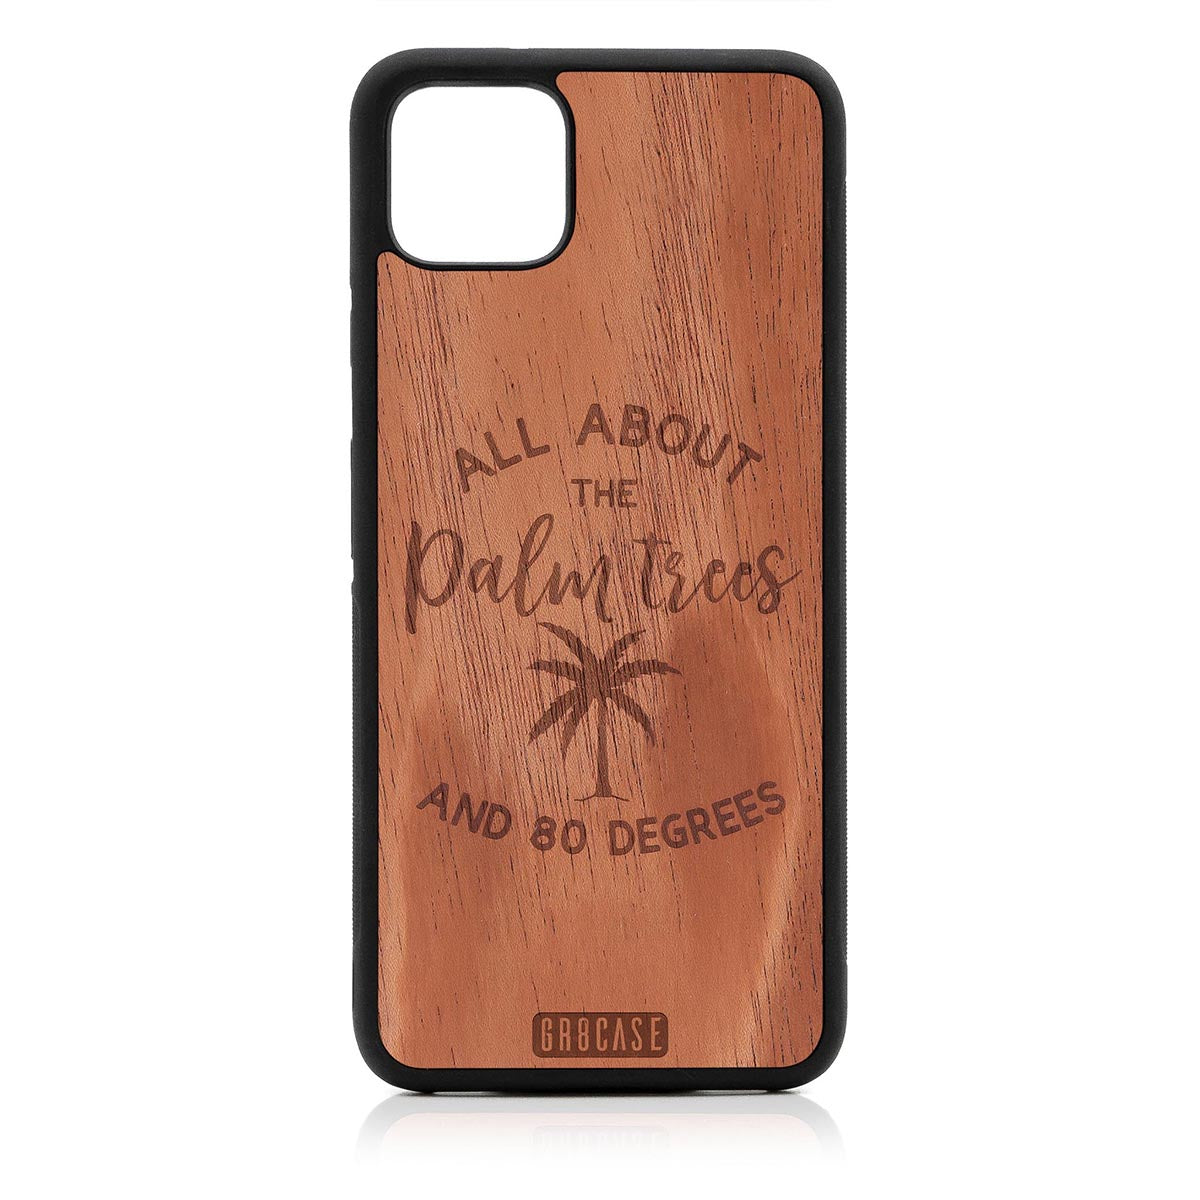 All About The Palm Trees and 80 Degrees Design Wood Case For Google Pixel 4 XL by GR8CASE